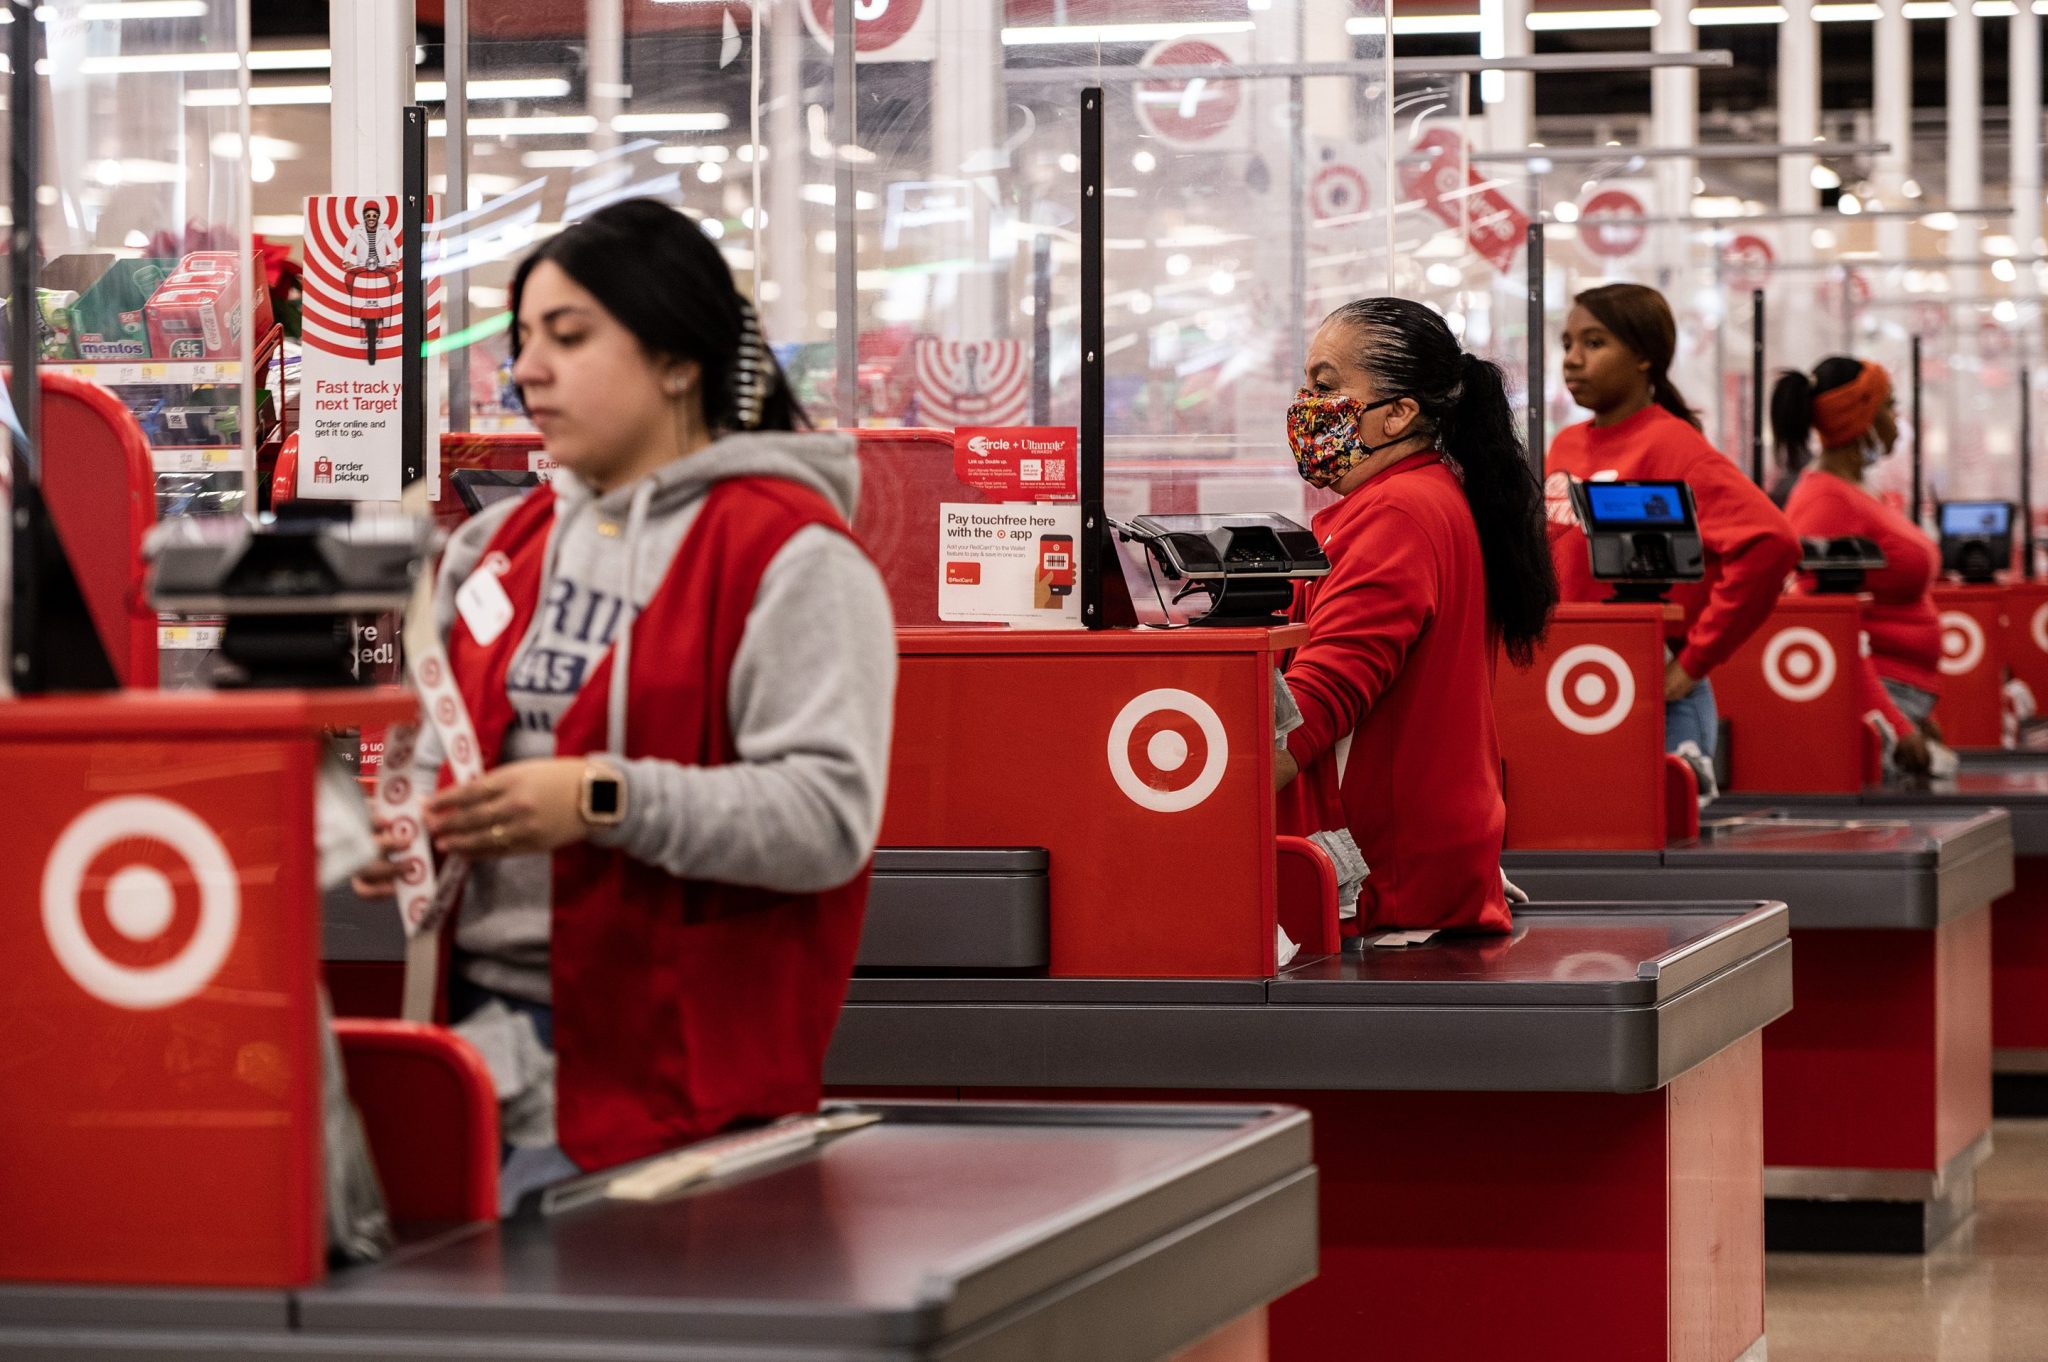 Target is copying Walmart and Amazon to get out of its sales slump